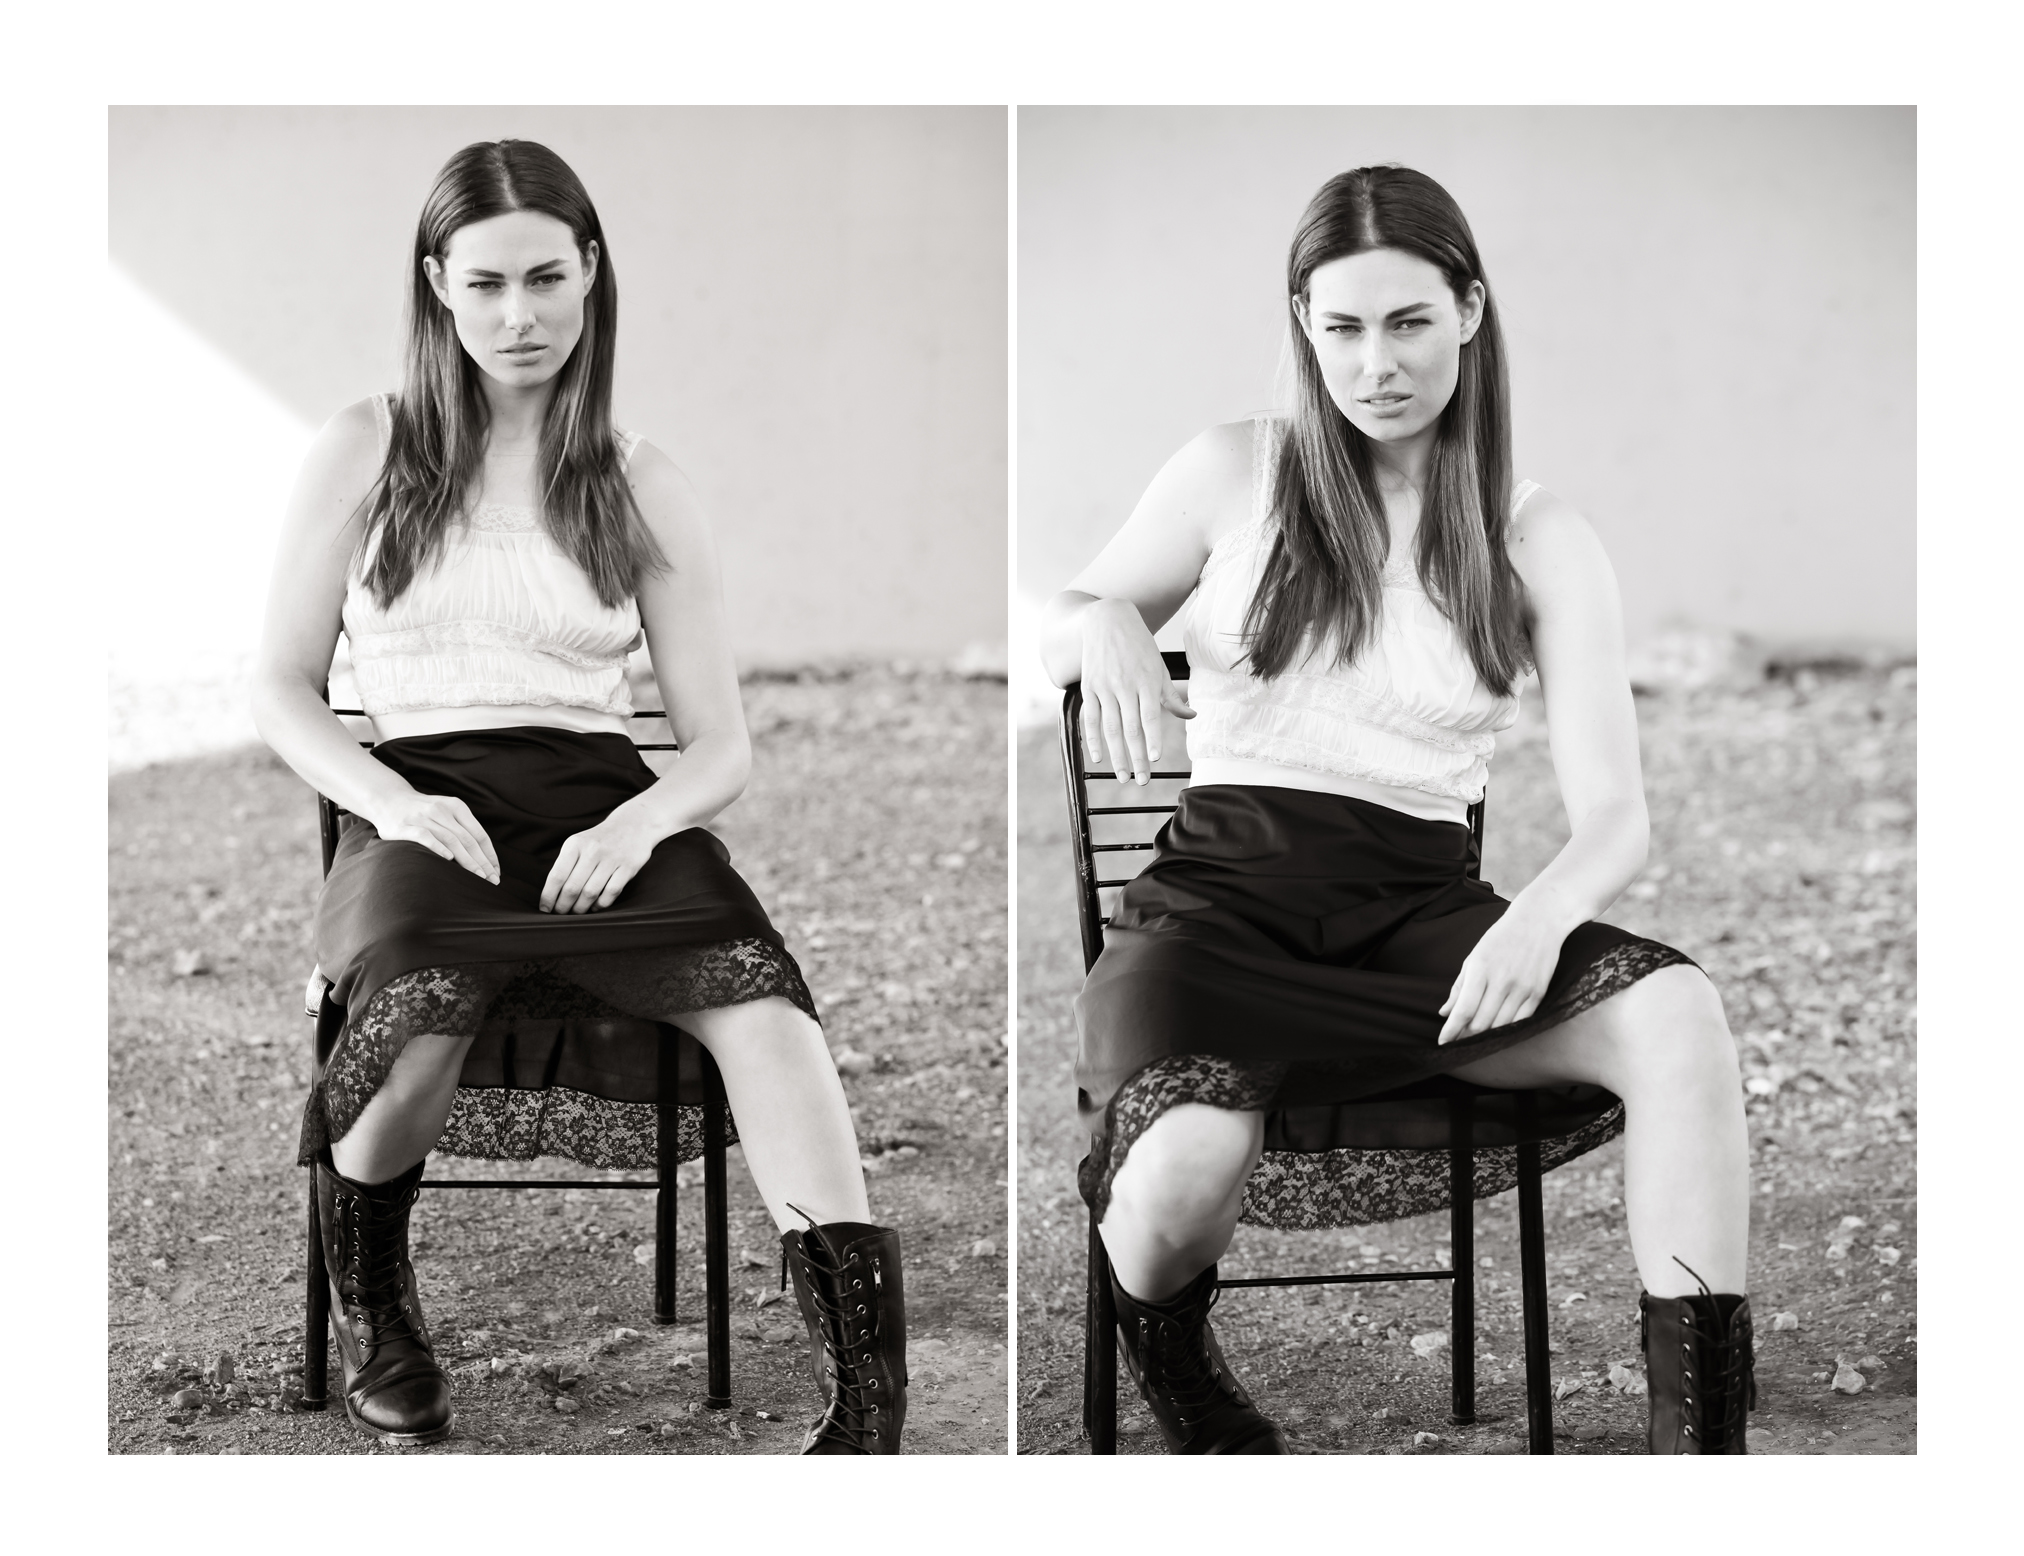 Young woman with long brown hair models in photography taken in a vacant lot while sitting in a chair wearing a white sleeveless top and black lacy skirt